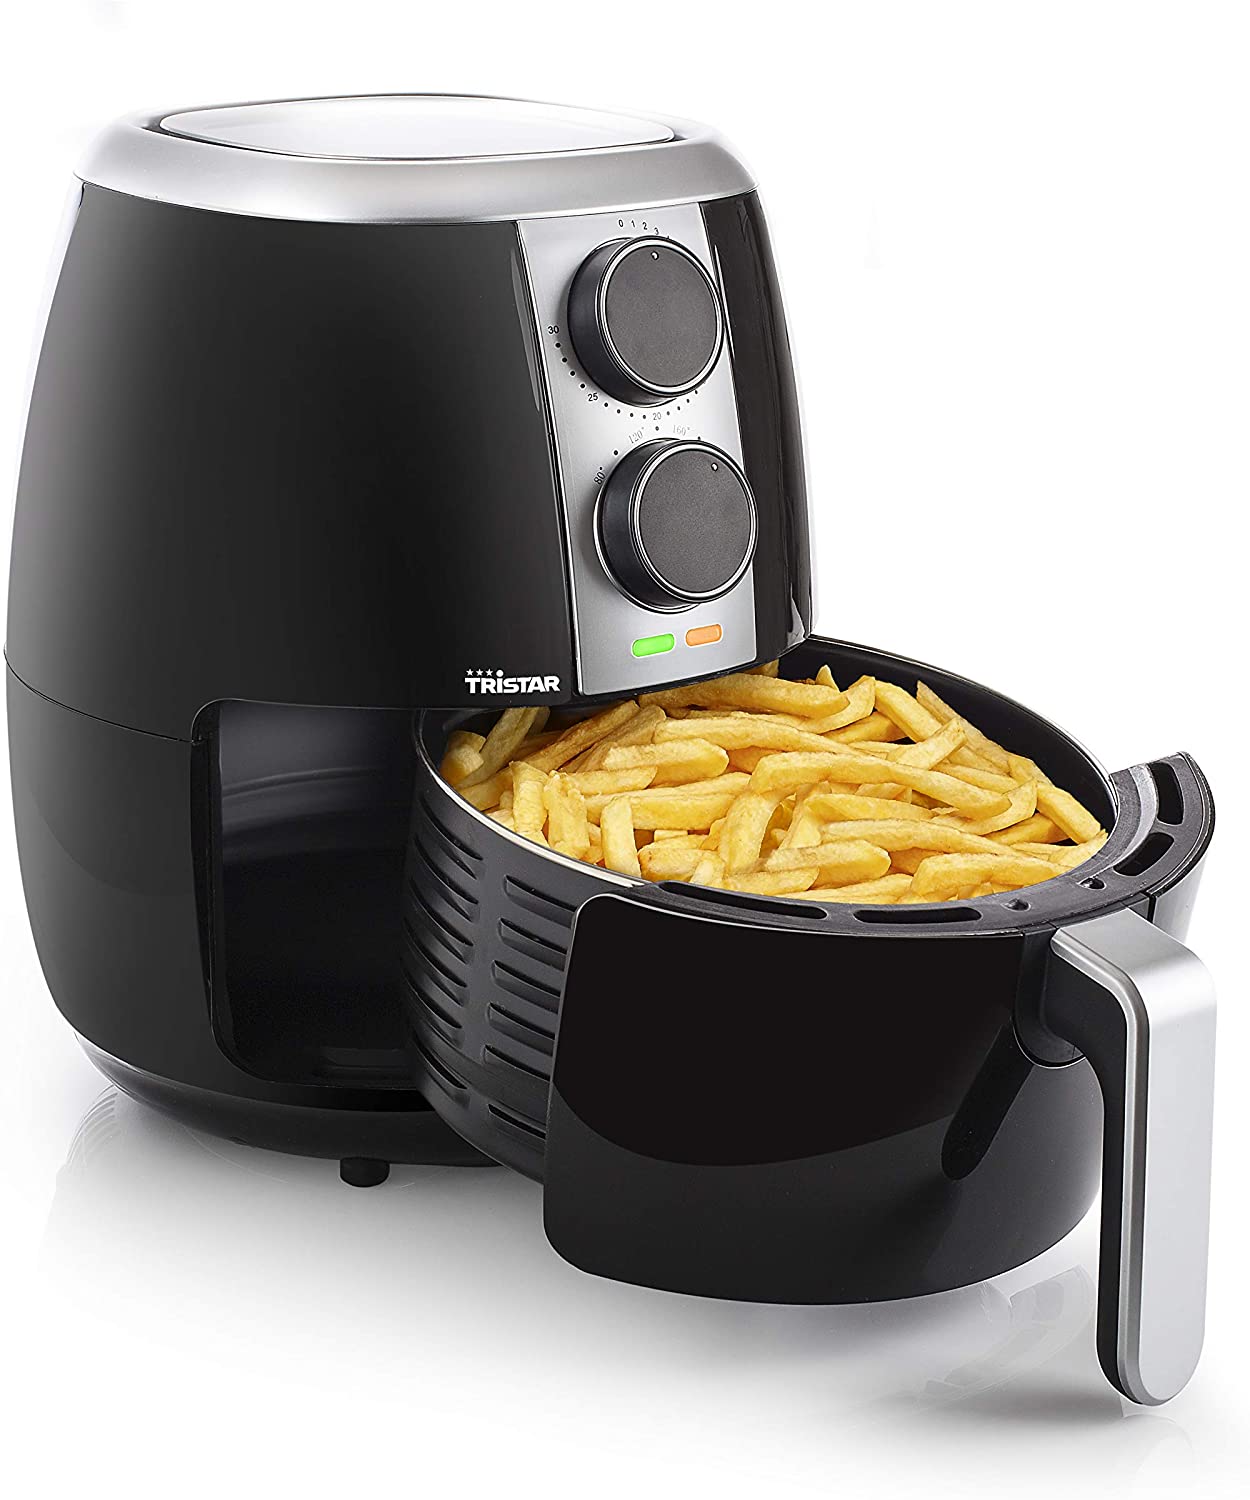 Tristar FR-6989 Crispy Fryer XL with Adjustable Thermostat and Timer; Oil-Free; Easy Clean - 3.5 Litre Capacity